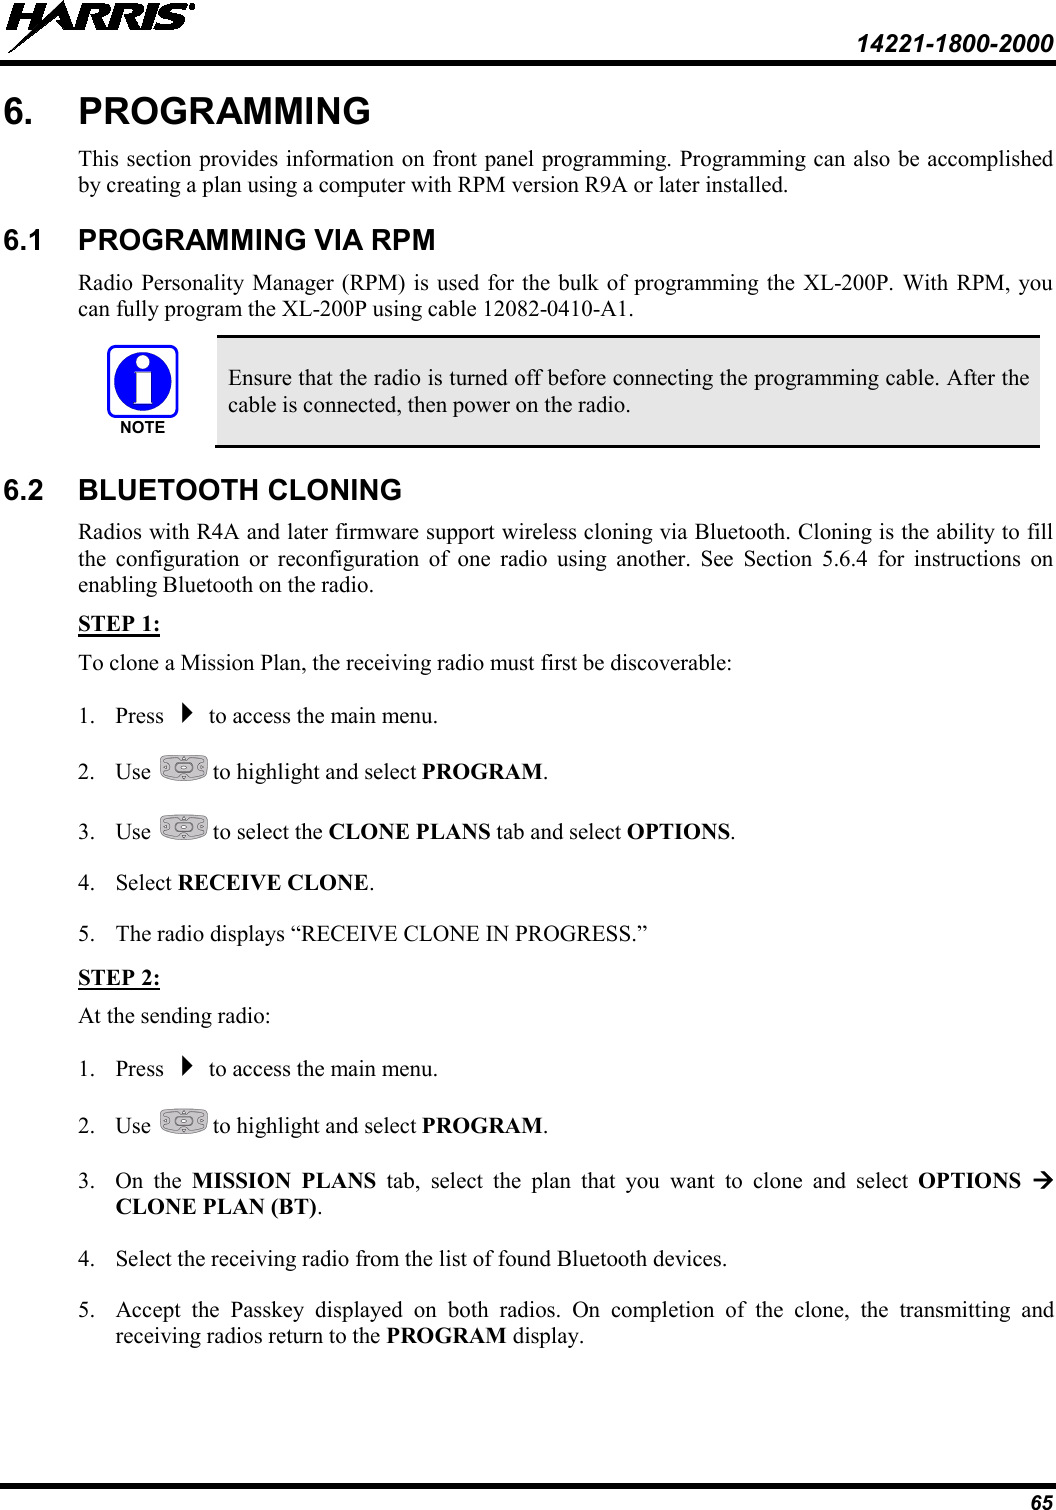  14221-1800-2000 65 6.  PROGRAMMING This section provides information on front panel programming. Programming can also be accomplished by creating a plan using a computer with RPM version R9A or later installed. 6.1 PROGRAMMING VIA RPM Radio Personality Manager (RPM) is used for the bulk of programming the XL-200P. With RPM, you can fully program the XL-200P using cable 12082-0410-A1.  Ensure that the radio is turned off before connecting the programming cable. After the cable is connected, then power on the radio. 6.2 BLUETOOTH CLONING Radios with R4A and later firmware support wireless cloning via Bluetooth. Cloning is the ability to fill the configuration or reconfiguration of one radio using another. See Section 5.6.4  for instructions on enabling Bluetooth on the radio. To clone a Mission Plan, the receiving radio must first be discoverable: STEP 1: 1. Press  to access the main menu. 2. Use   to highlight and select PROGRAM. 3. Use   to select the CLONE PLANS tab and select OPTIONS. 4. Select RECEIVE CLONE. 5. The radio displays “RECEIVE CLONE IN PROGRESS.” At the sending radio: STEP 2: 1. Press  to access the main menu. 2. Use   to highlight and select PROGRAM. 3. On the MISSION PLANS tab, select the plan that you want to clone and select OPTIONS  CLONE PLAN (BT). 4. Select the receiving radio from the list of found Bluetooth devices. 5. Accept the Passkey displayed on both radios. On completion of the clone, the transmitting and receiving radios return to the PROGRAM display. NOTE